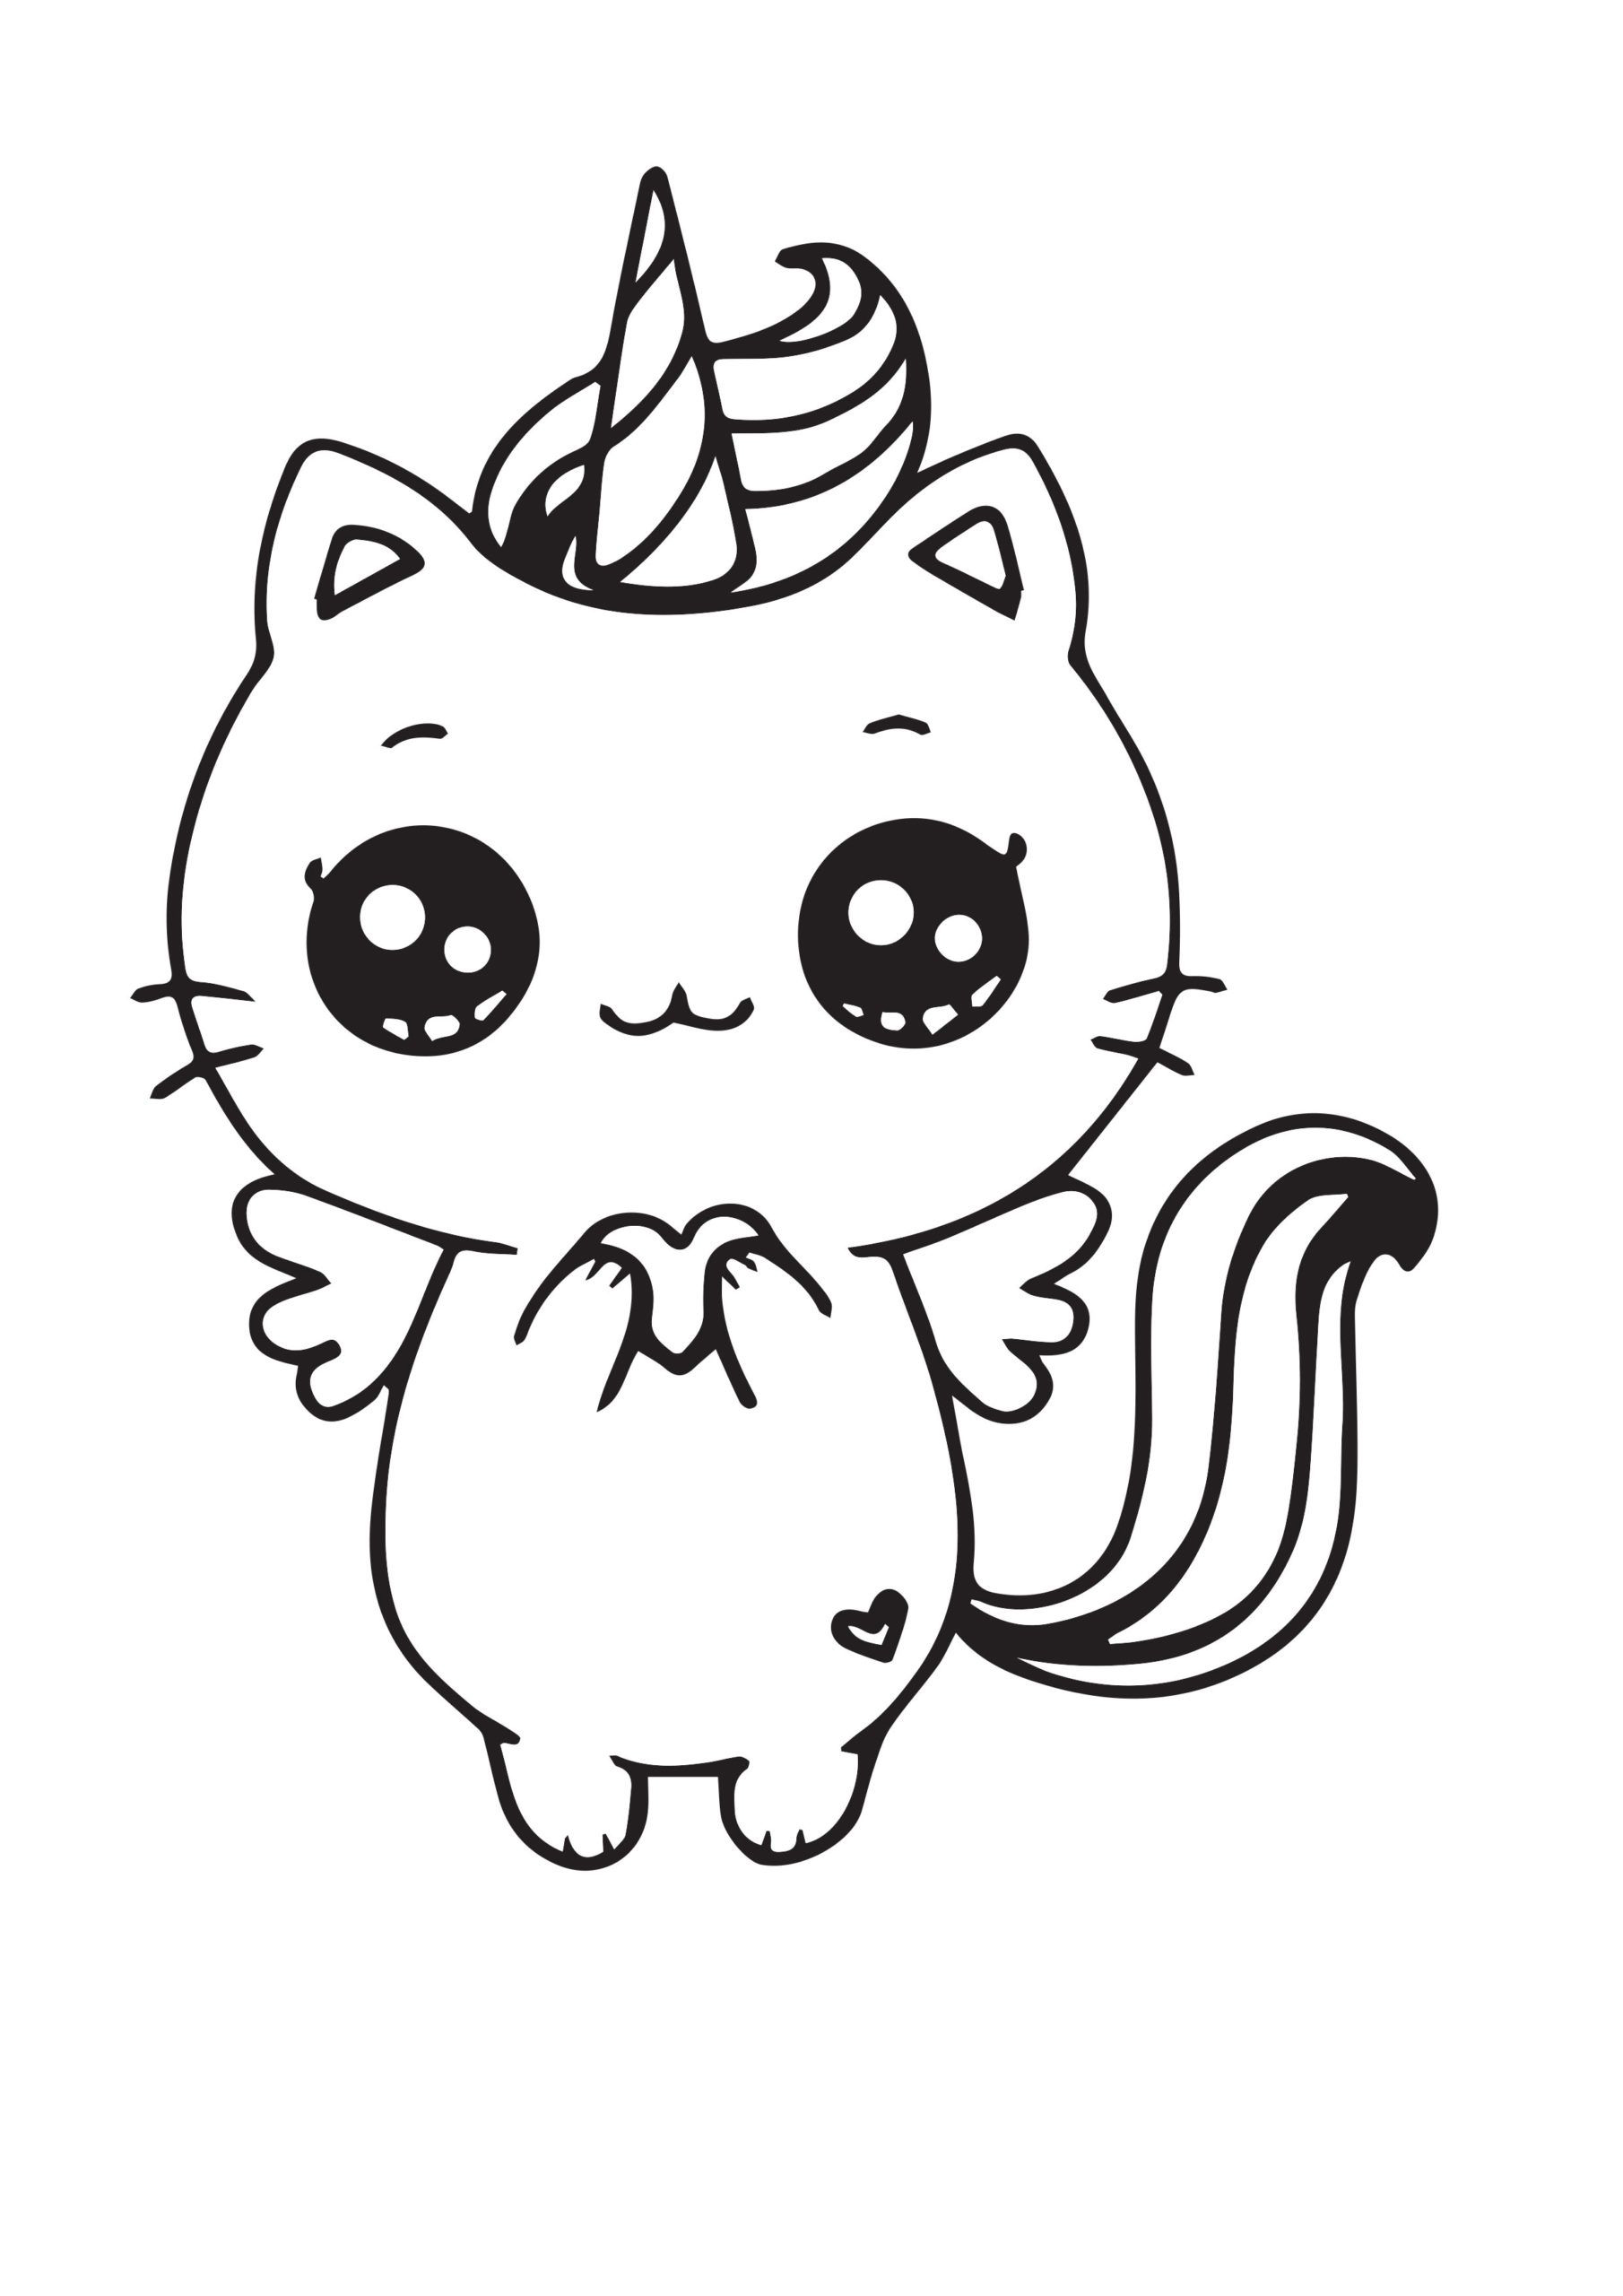 Printable Unicorn Cat Coloring Page for kids.